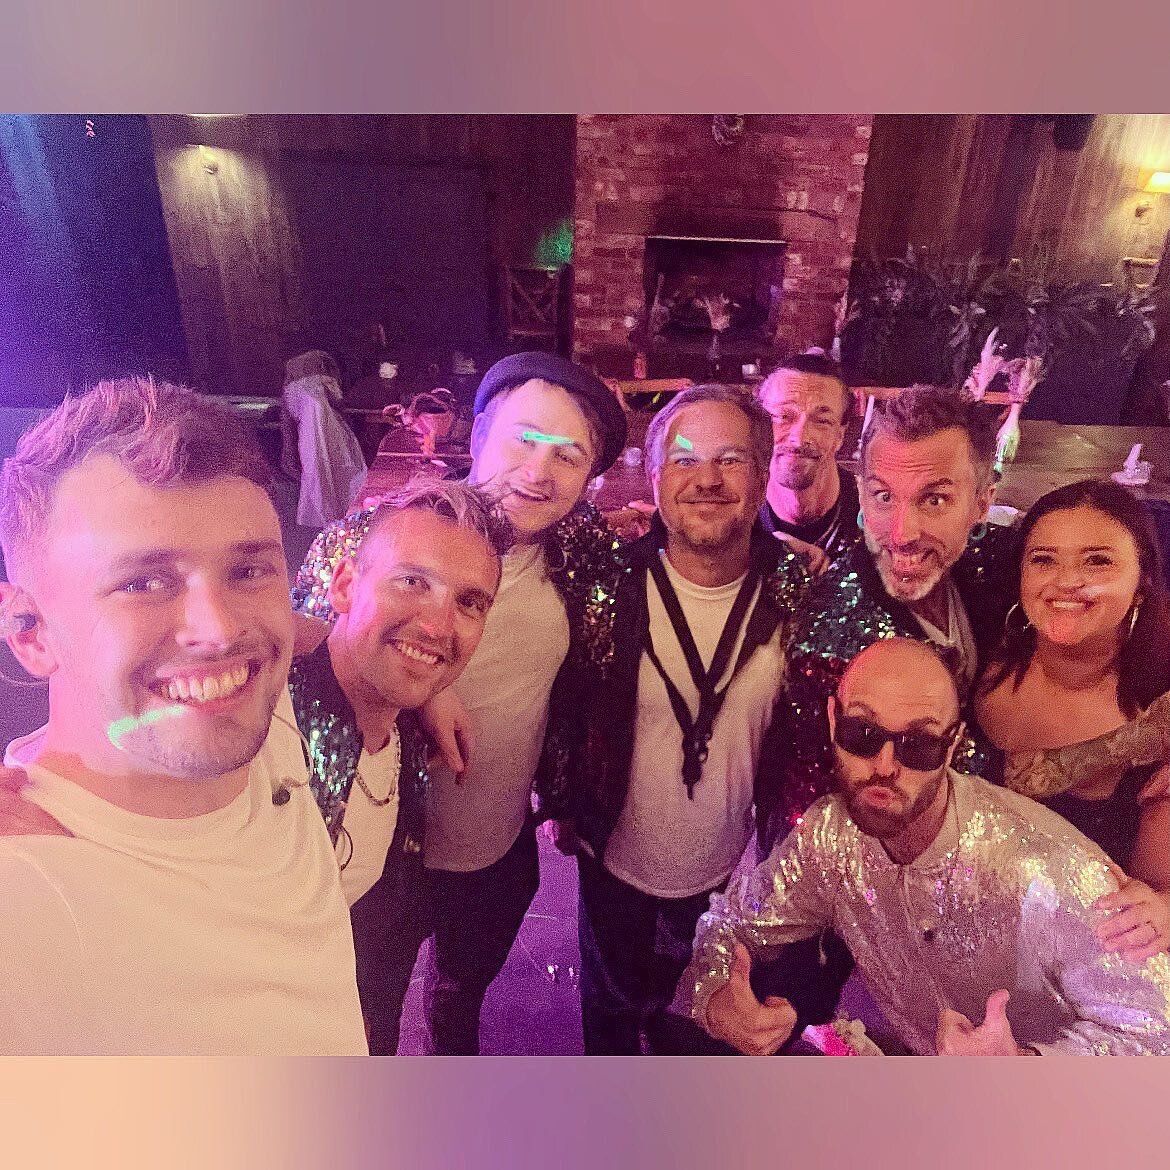 It&rsquo;s giving.. a 3 gig weekend ✌🏽🤎🎤

This weekend we were lucky enough to celebrate at the gorgeous weddings of Kayleigh &amp; Liam, plus Sam &amp; Sarah! Also partied with Christina for her special birthday!